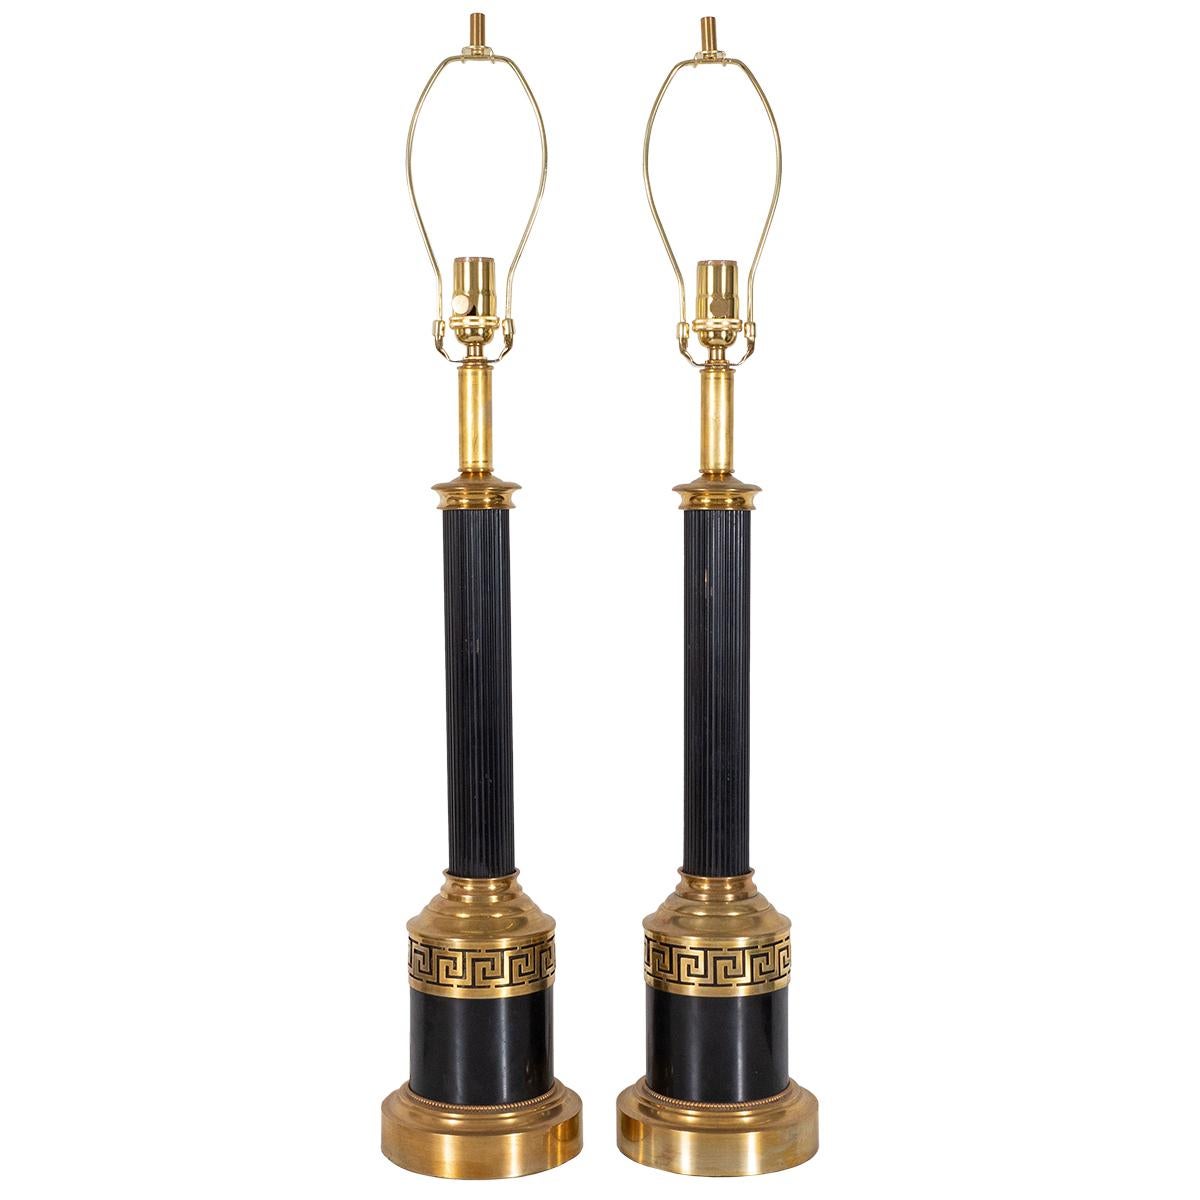 Pair of mixed metal neoclassical table lamps with pierced Greek key motif.